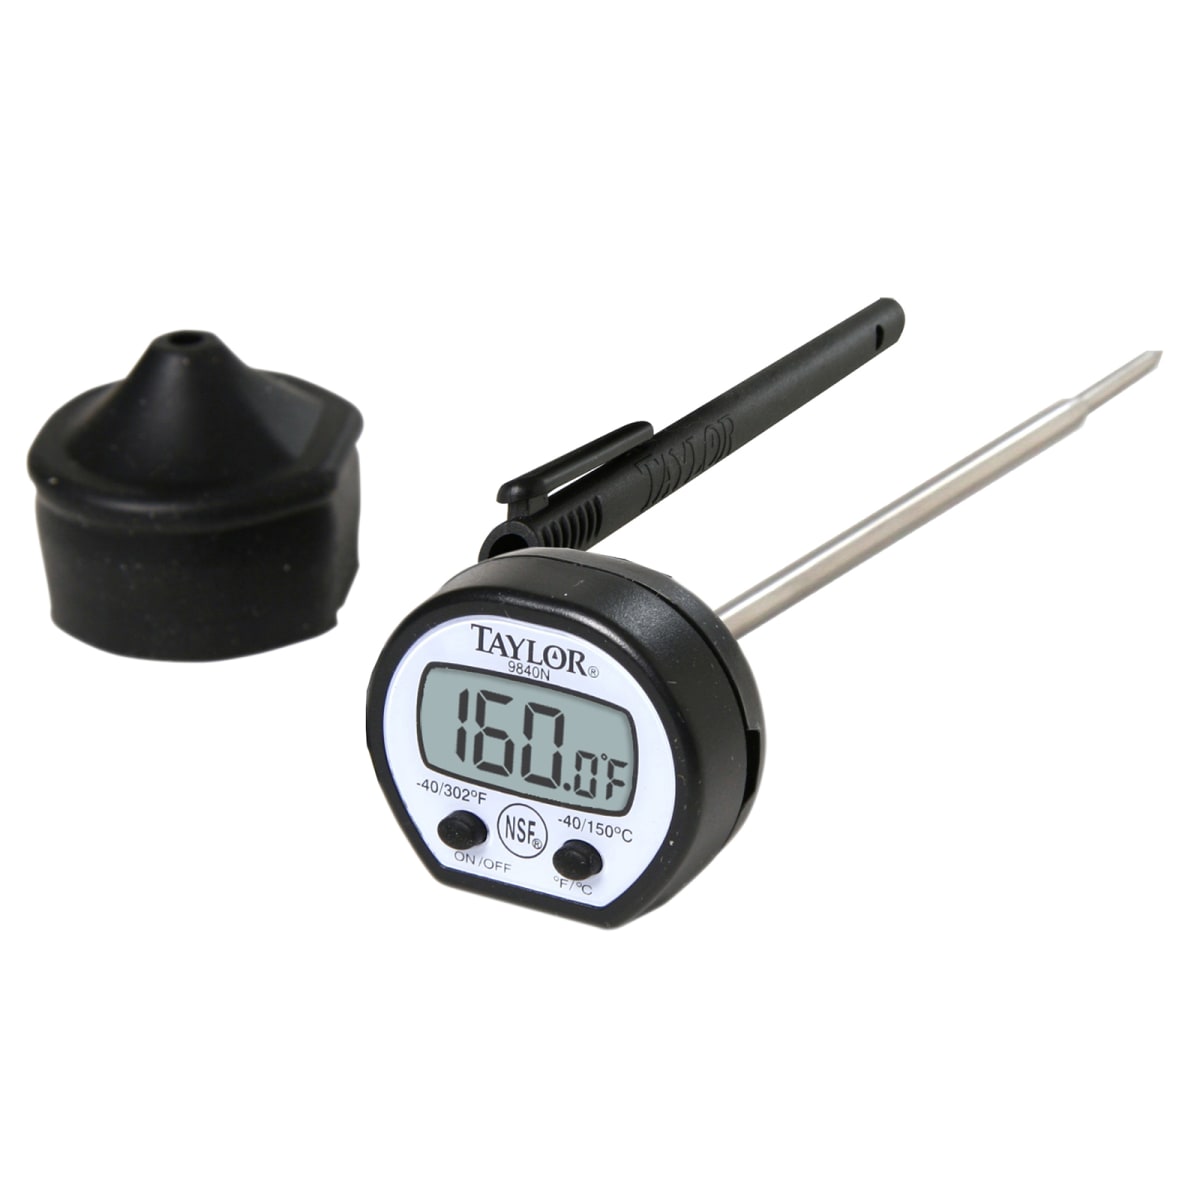 Classic 9840 Digital Instant Read Thermometer